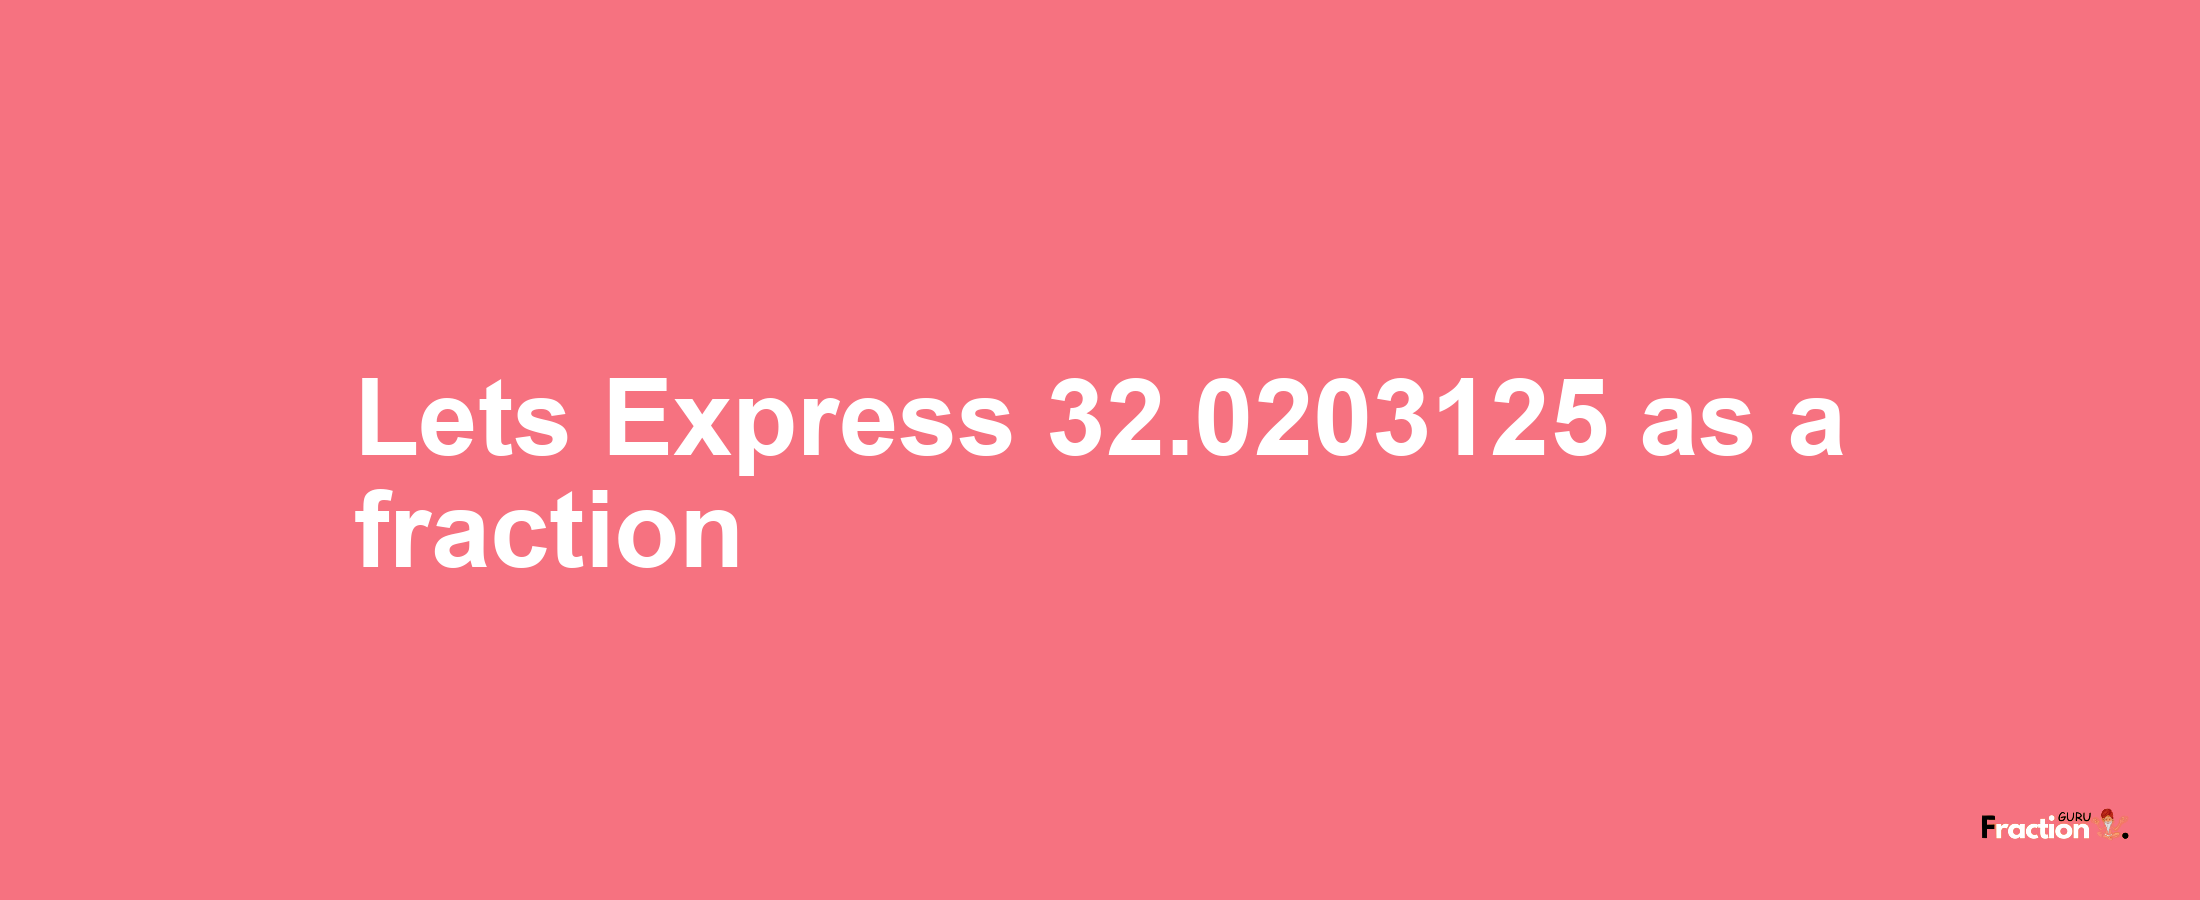 Lets Express 32.0203125 as afraction